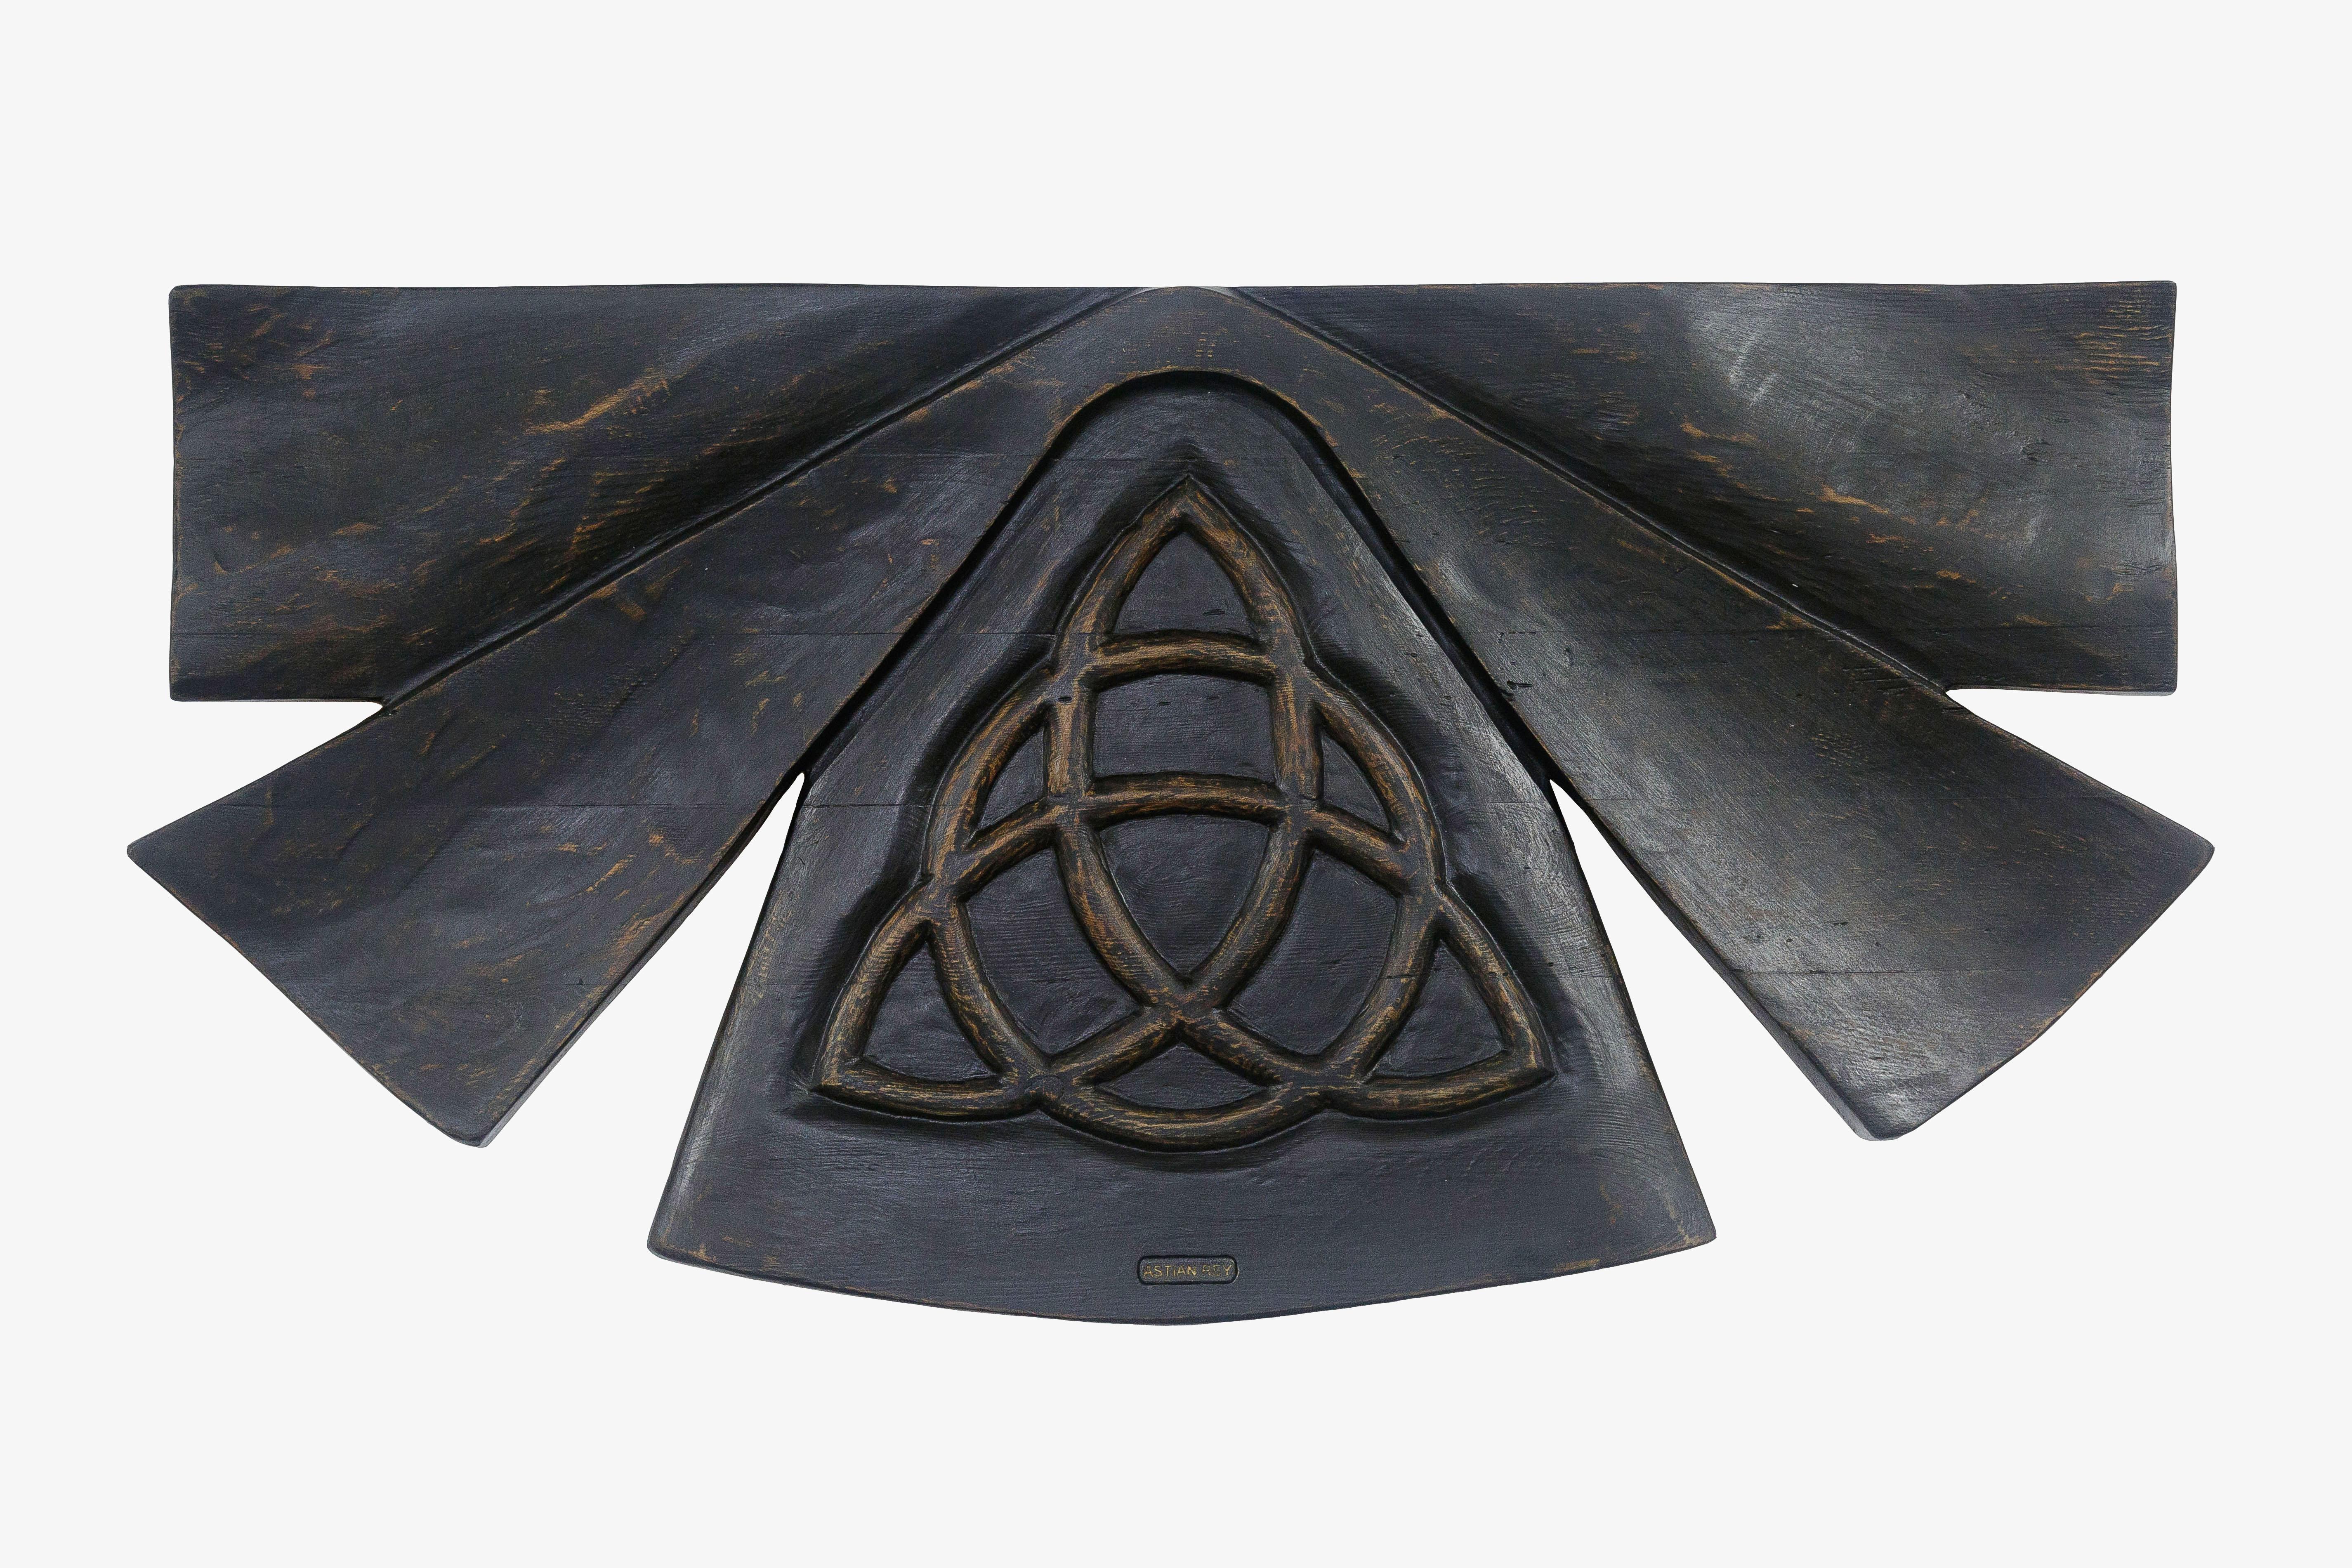  Astian Rey Abstract Sculpture - SACRED CLOTHES / BLACK EDITION